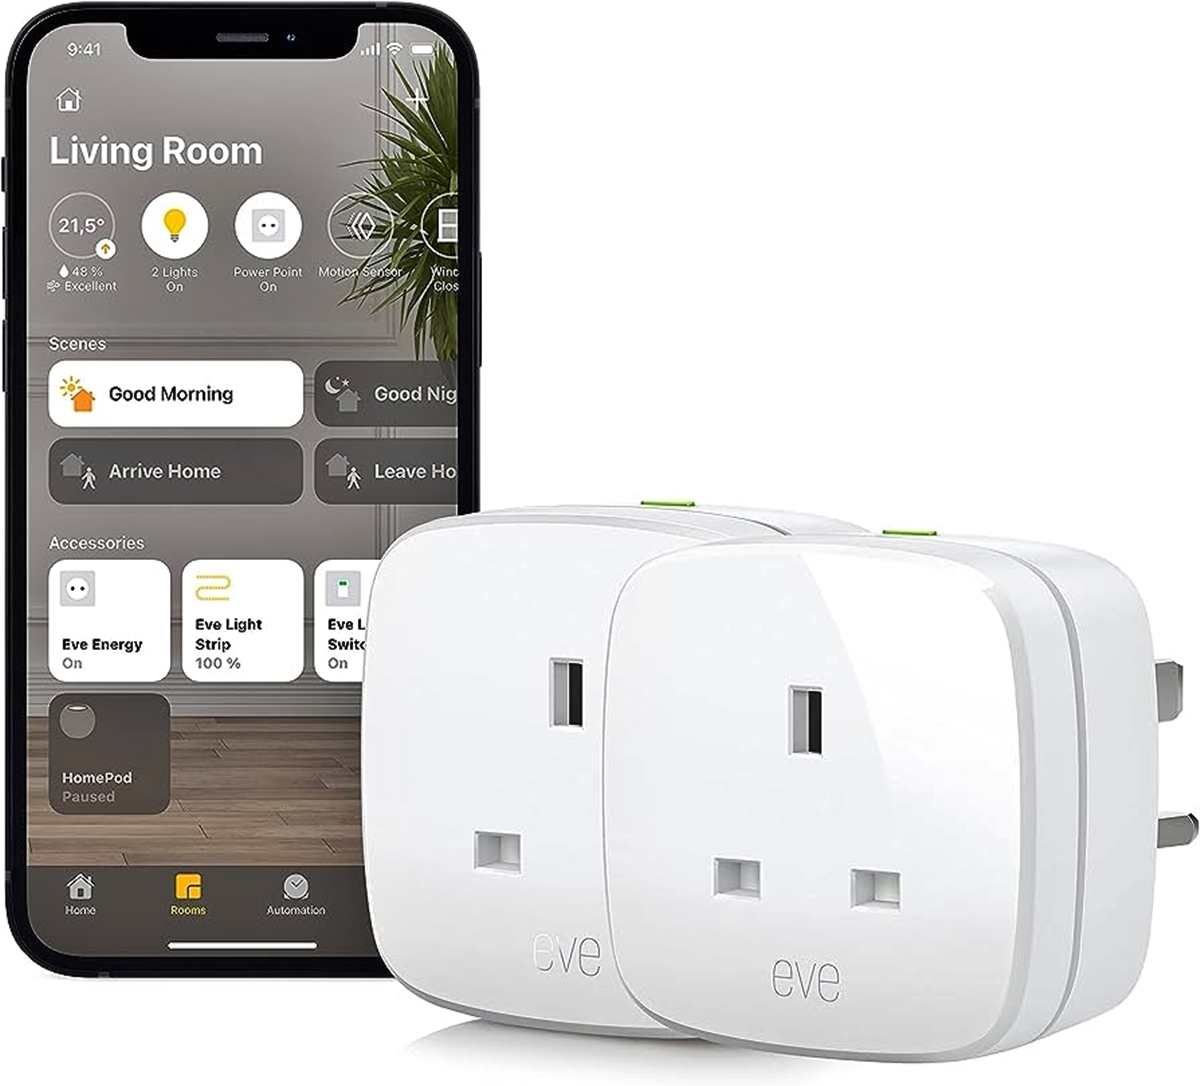 homekit-devices-eve-energy-tells-you-how-much-electricity-an-appliance-is-using